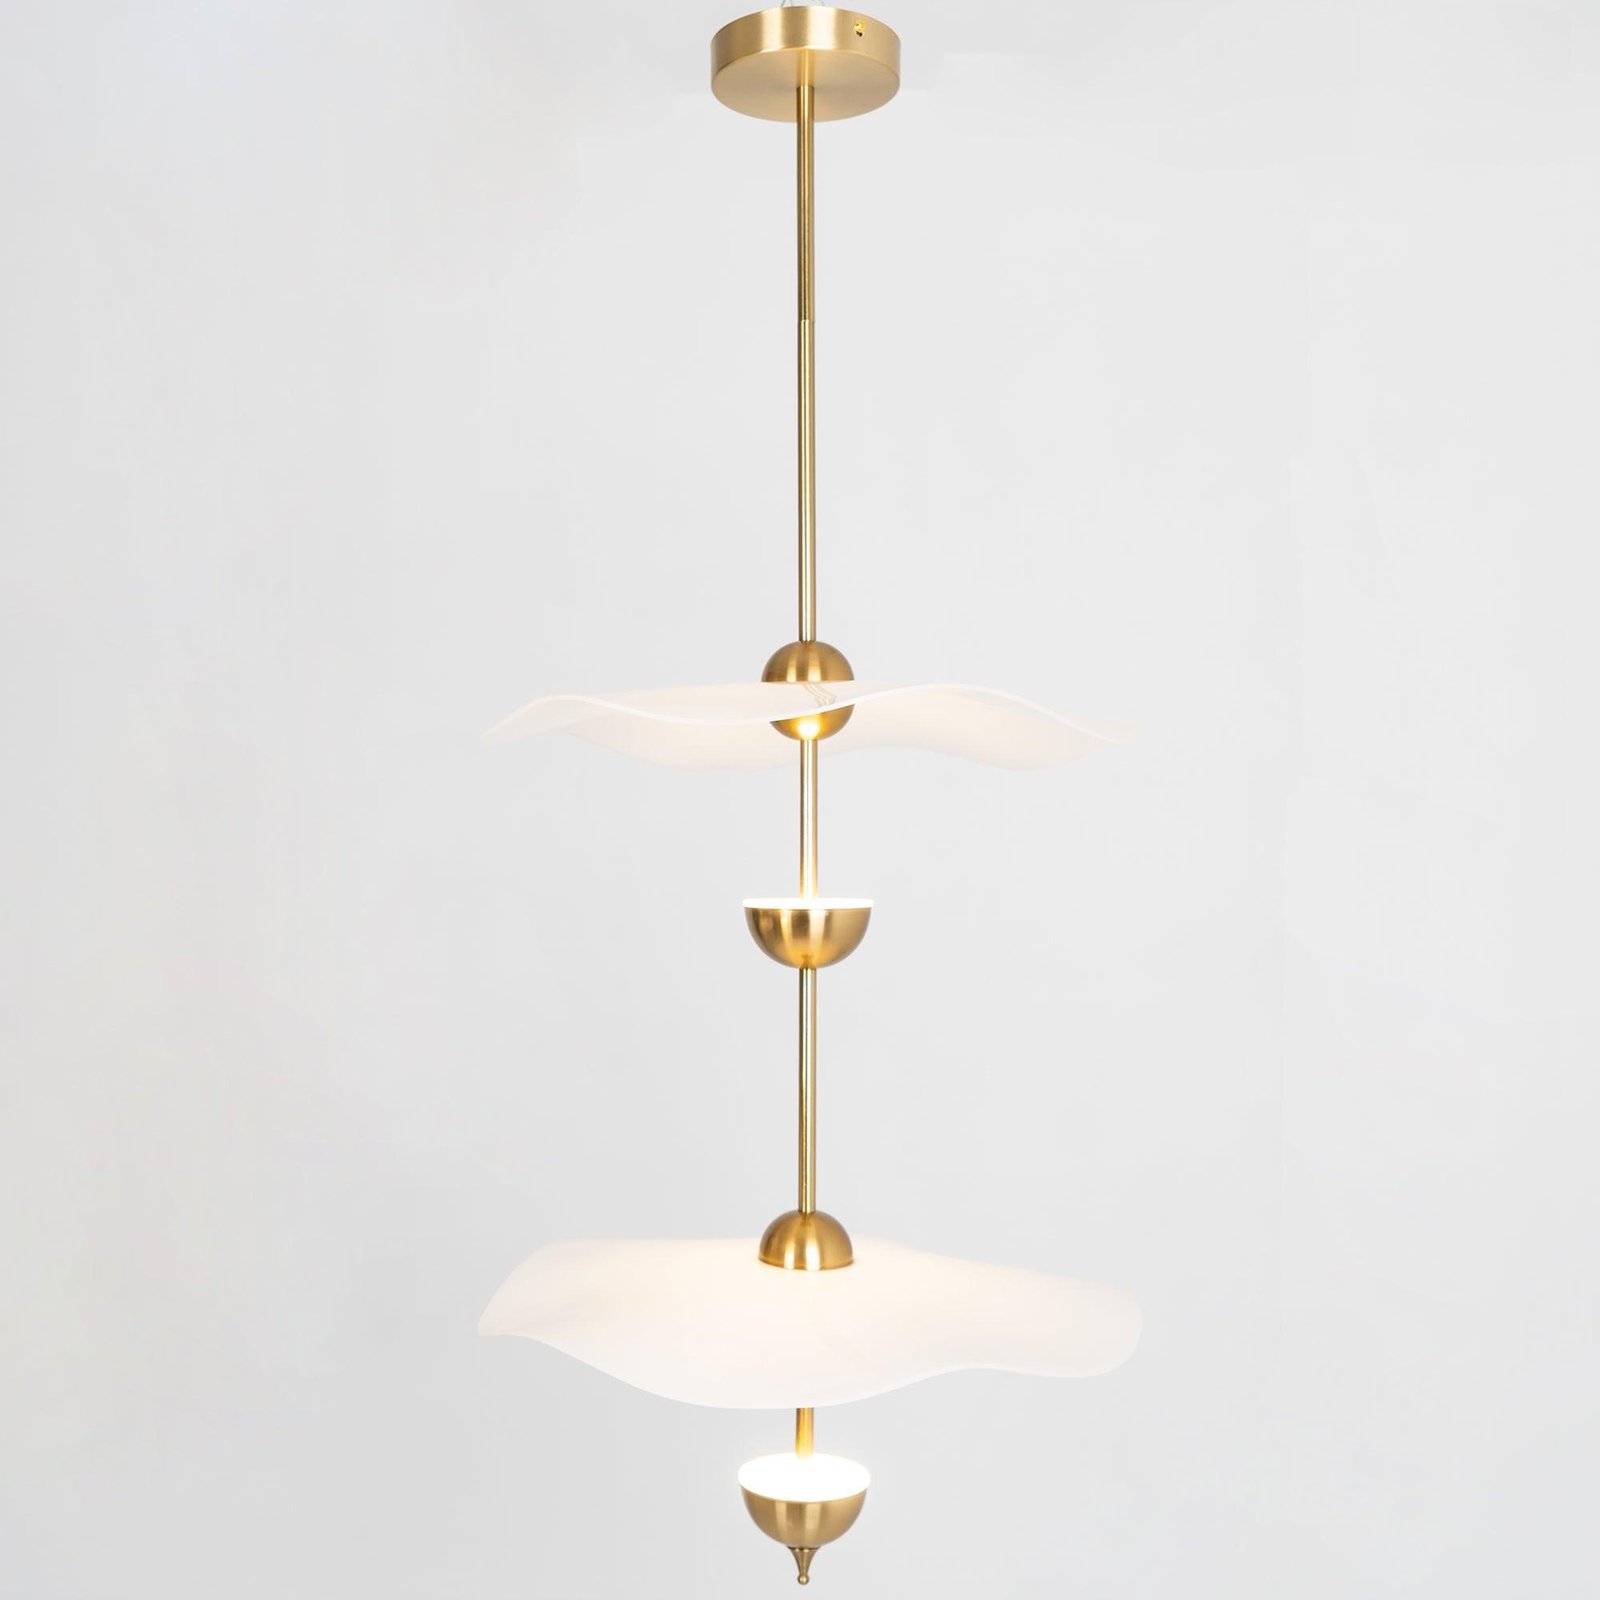 Double Biscuit Pendant Light, Diameter 15.7 inches x Height 27.5 inches, Diameter 40cm x Height 70cm, Gold Finish, Cool White Light (3300K to 5300K)